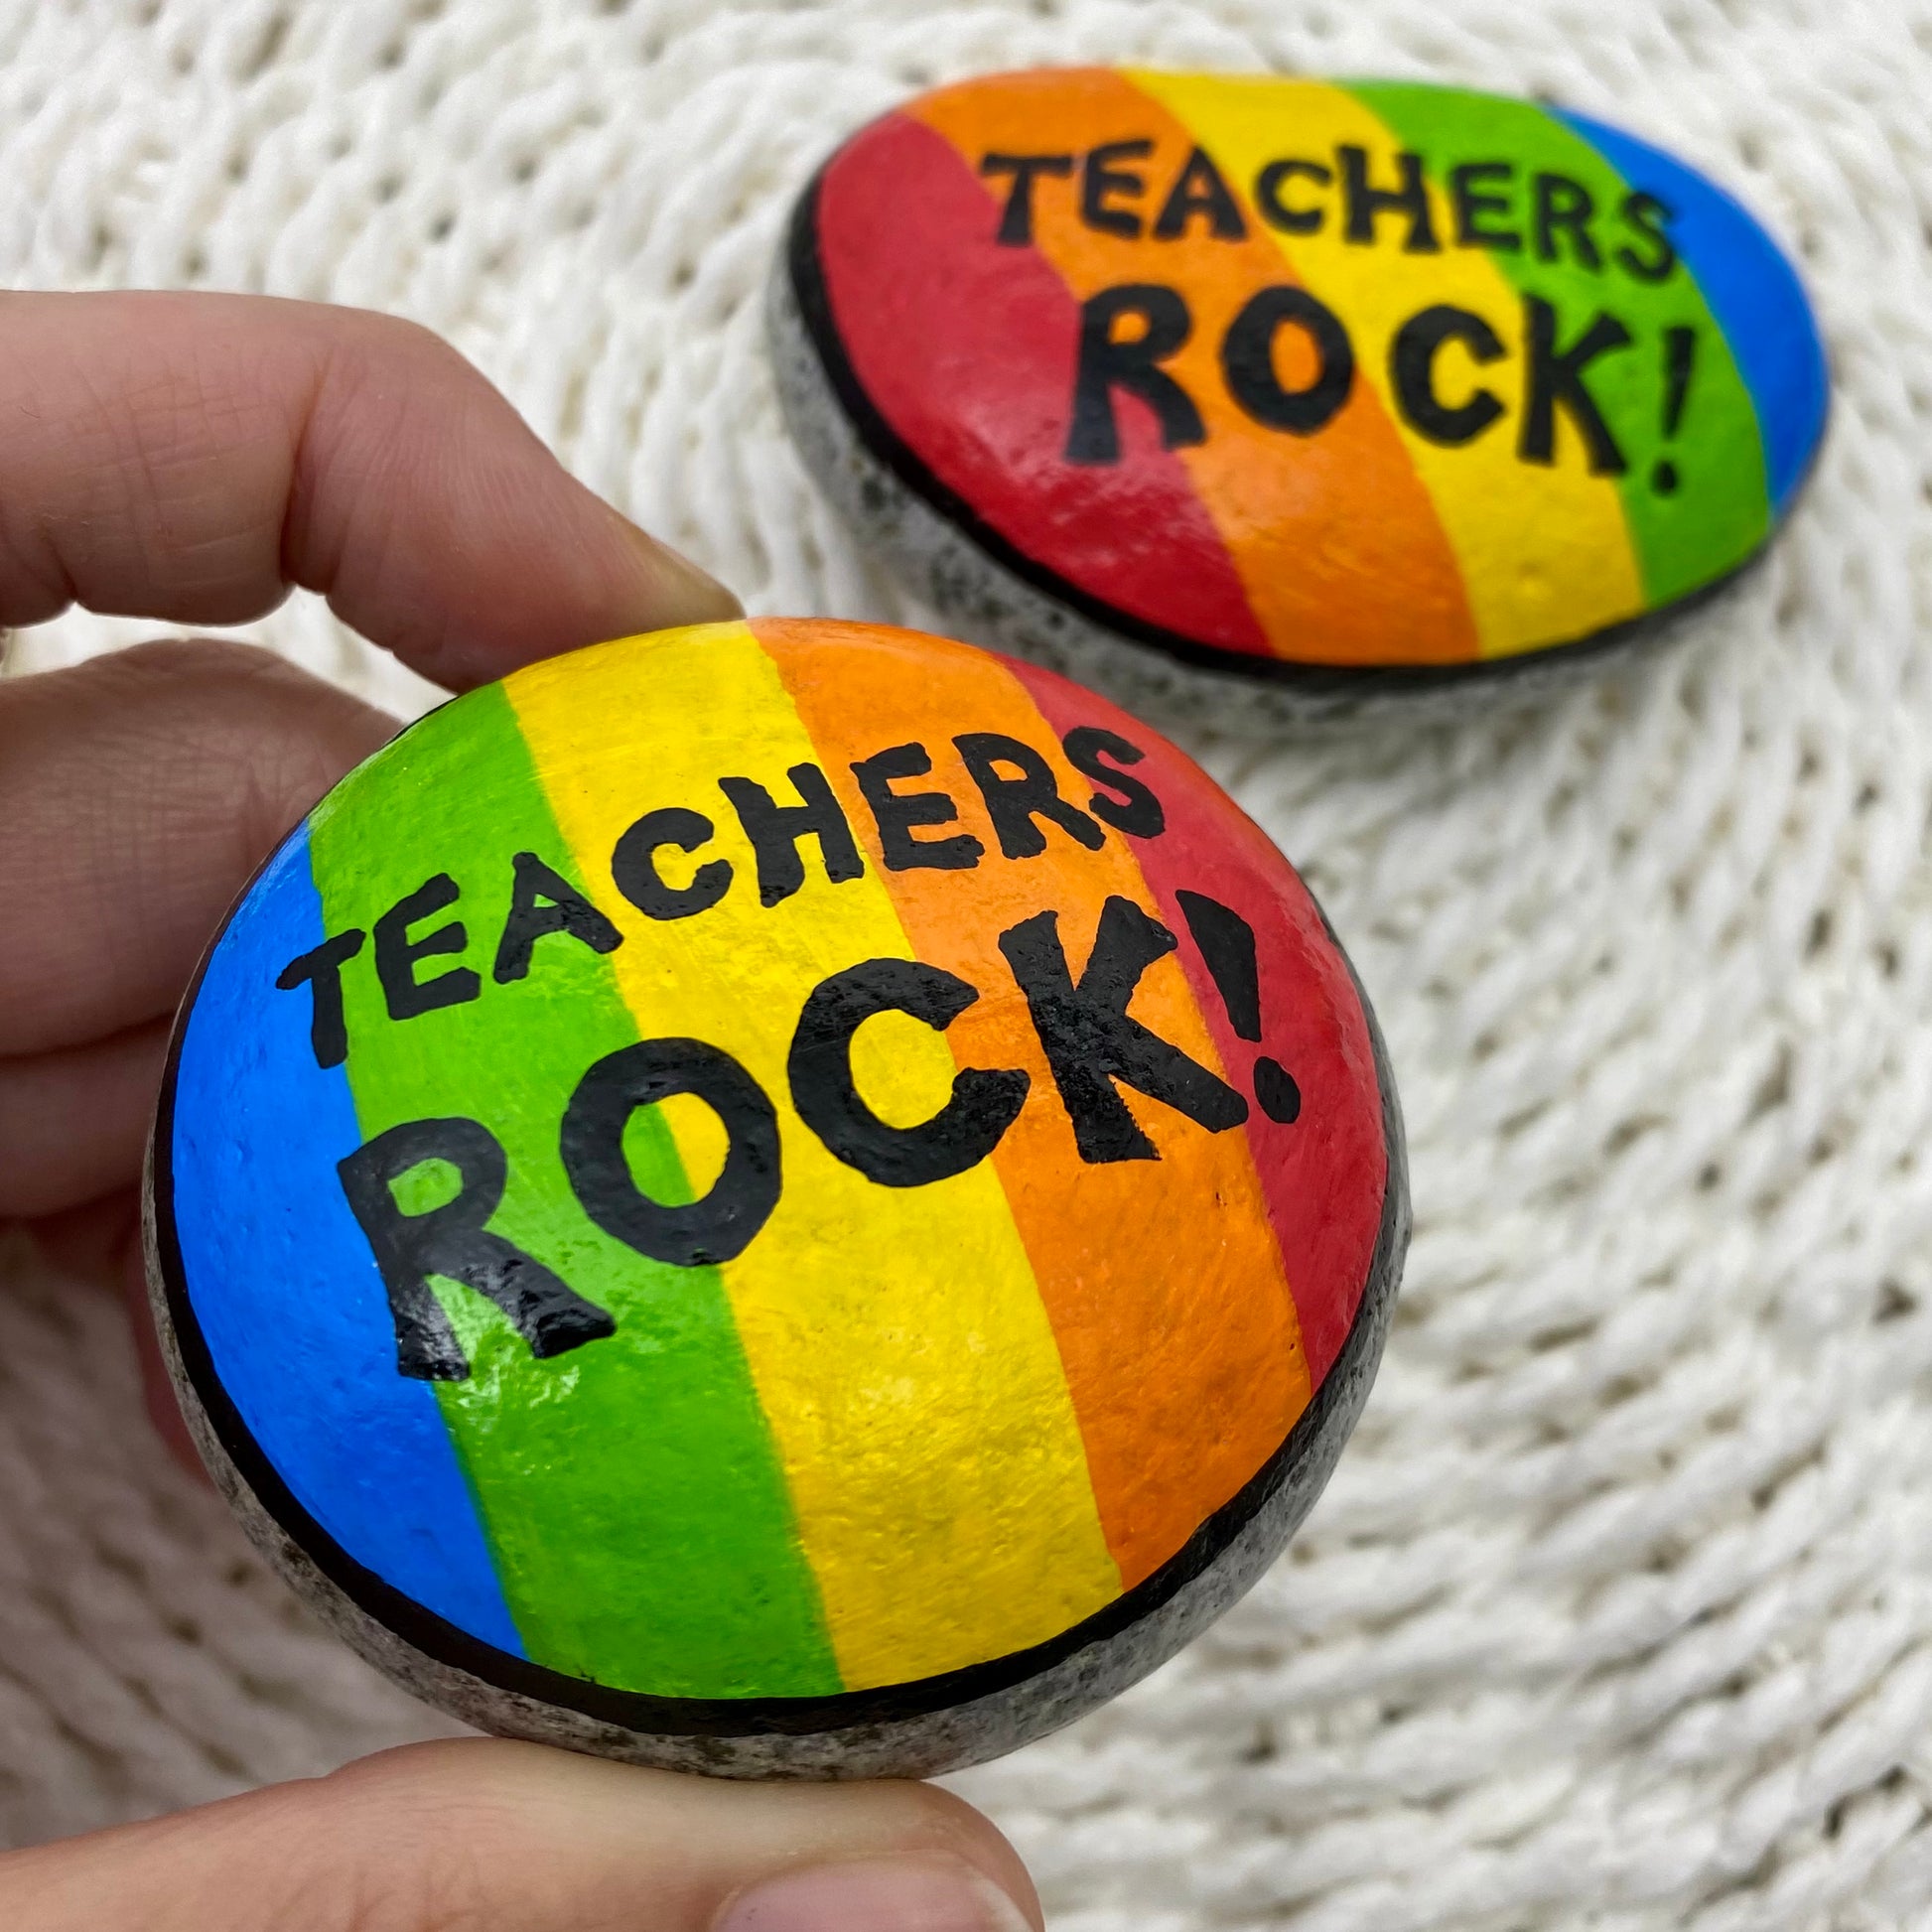 2 rocks painted with bright rainbow stripes and the words"Teachers Rock" written on.